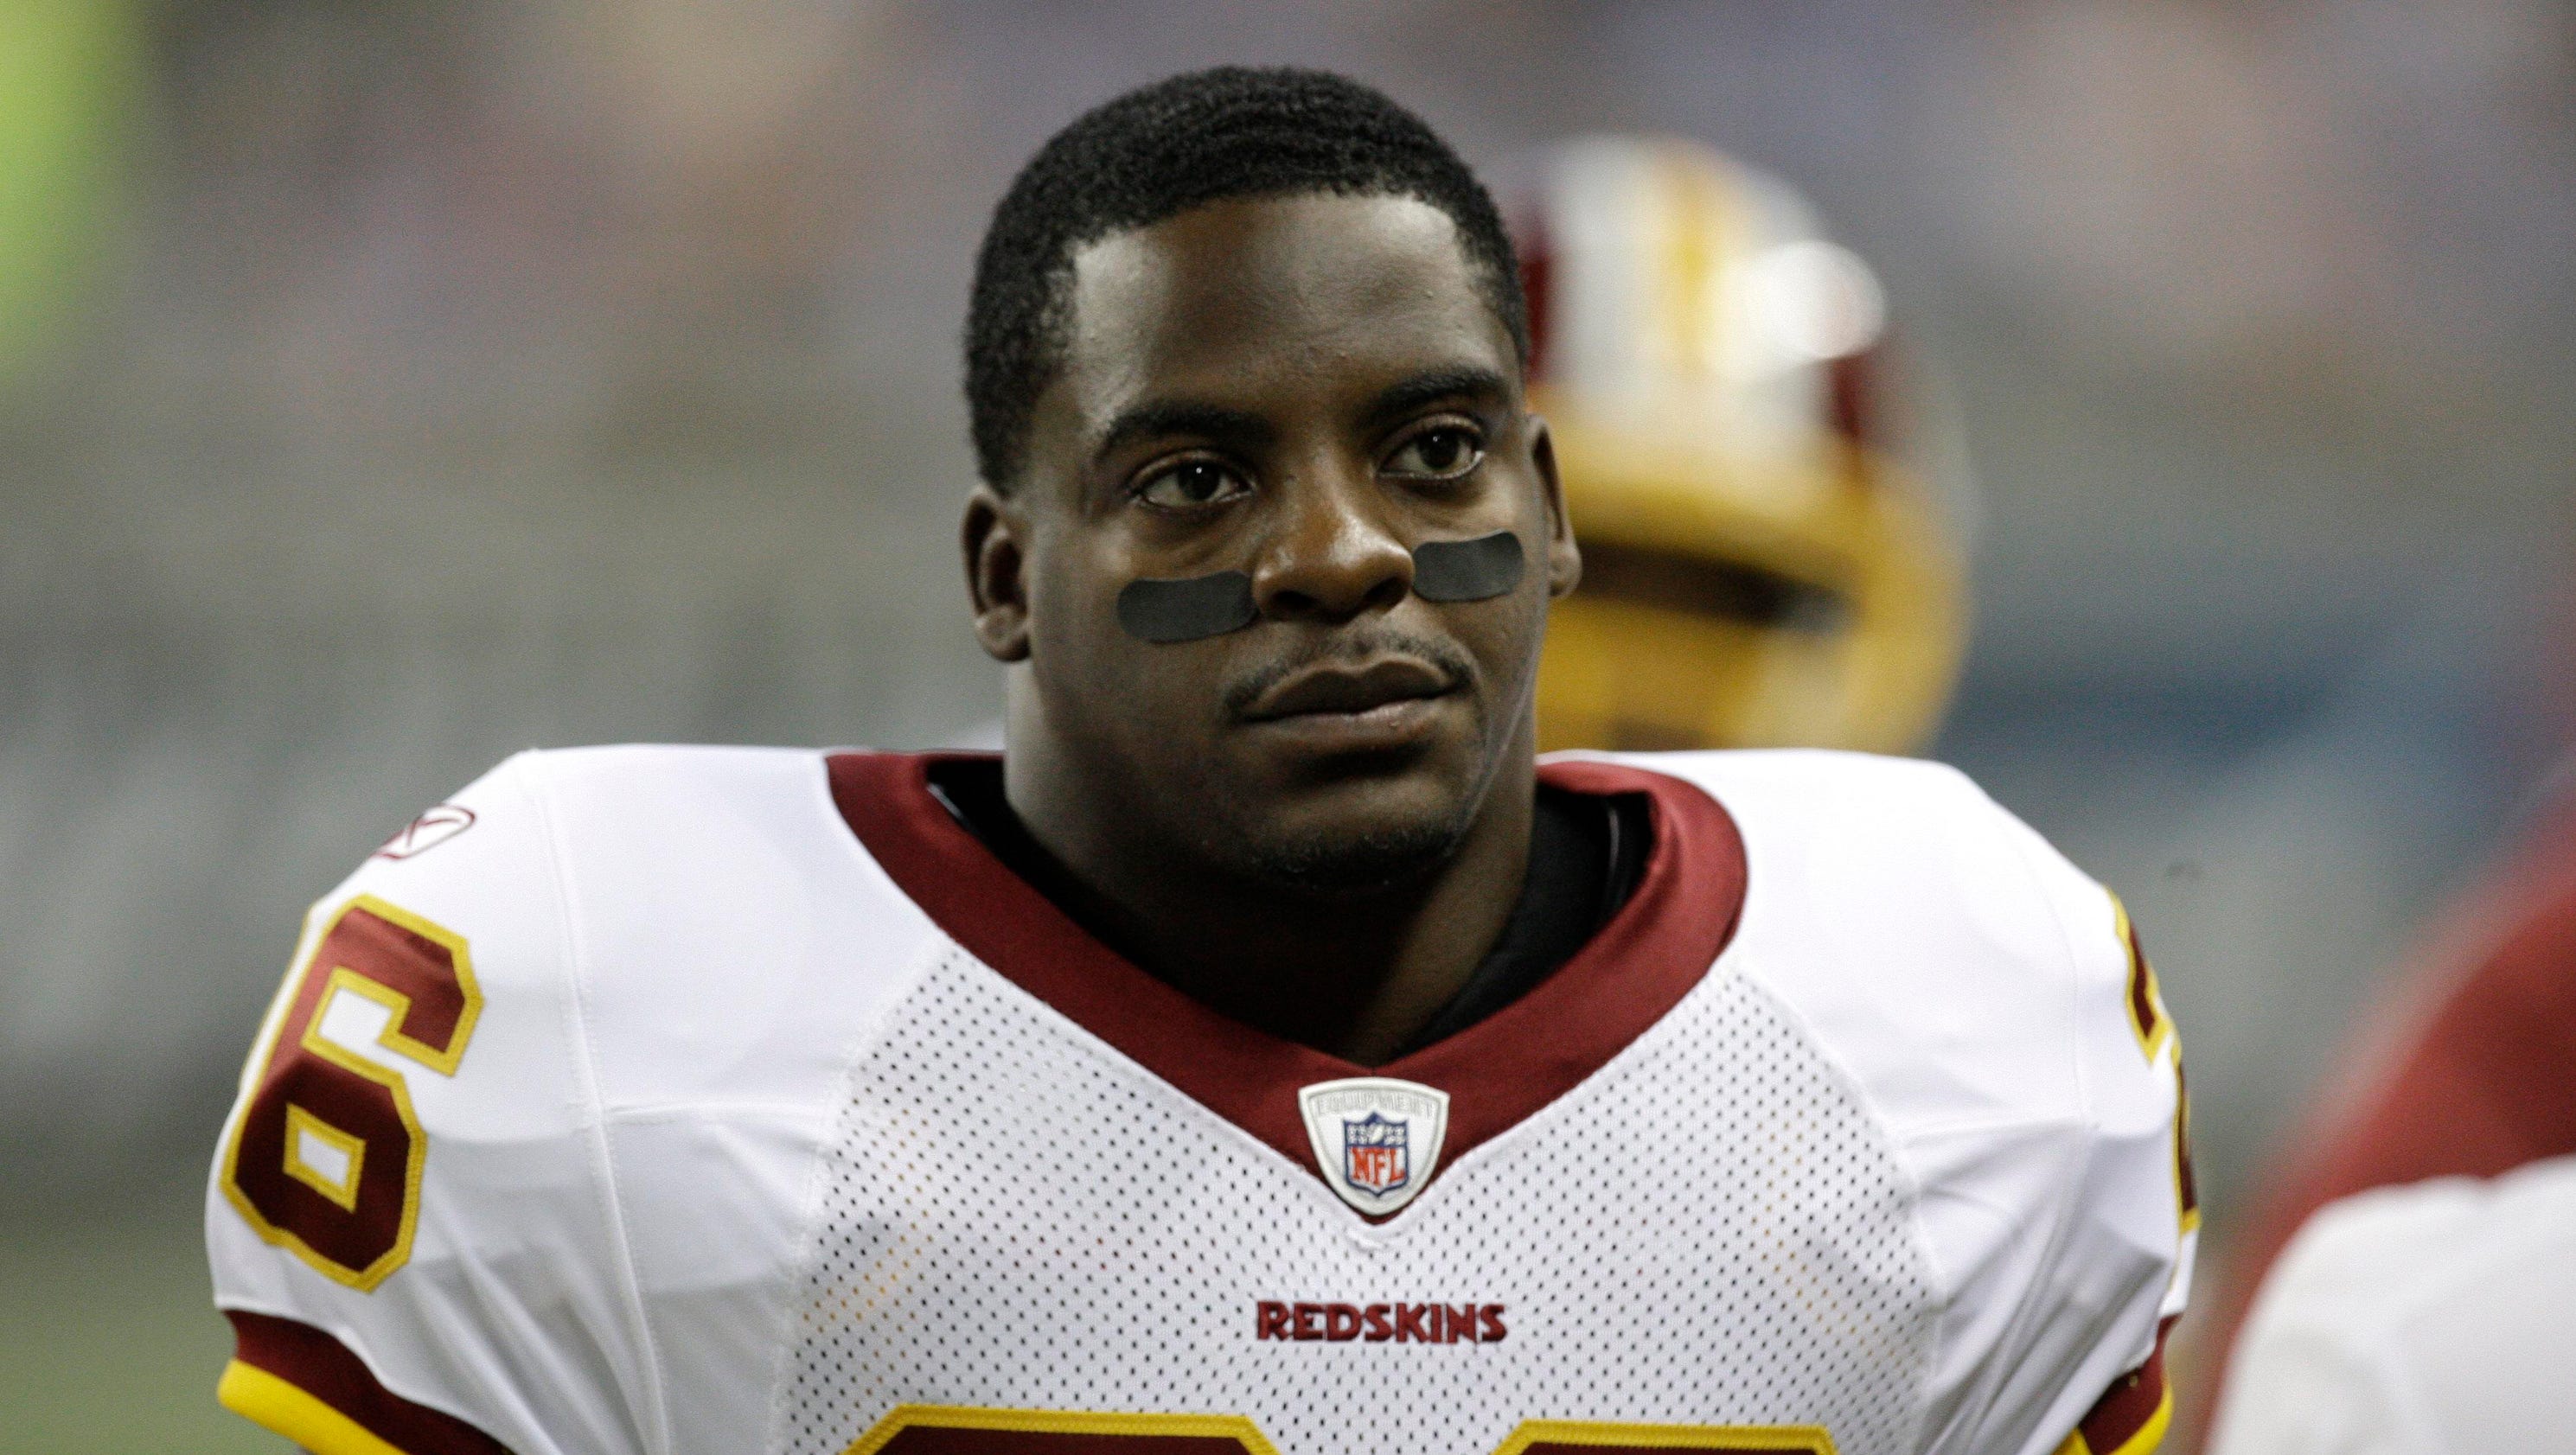 Clinton Portis owes nearly $5 million, counts mother as creditor3200 x 1680